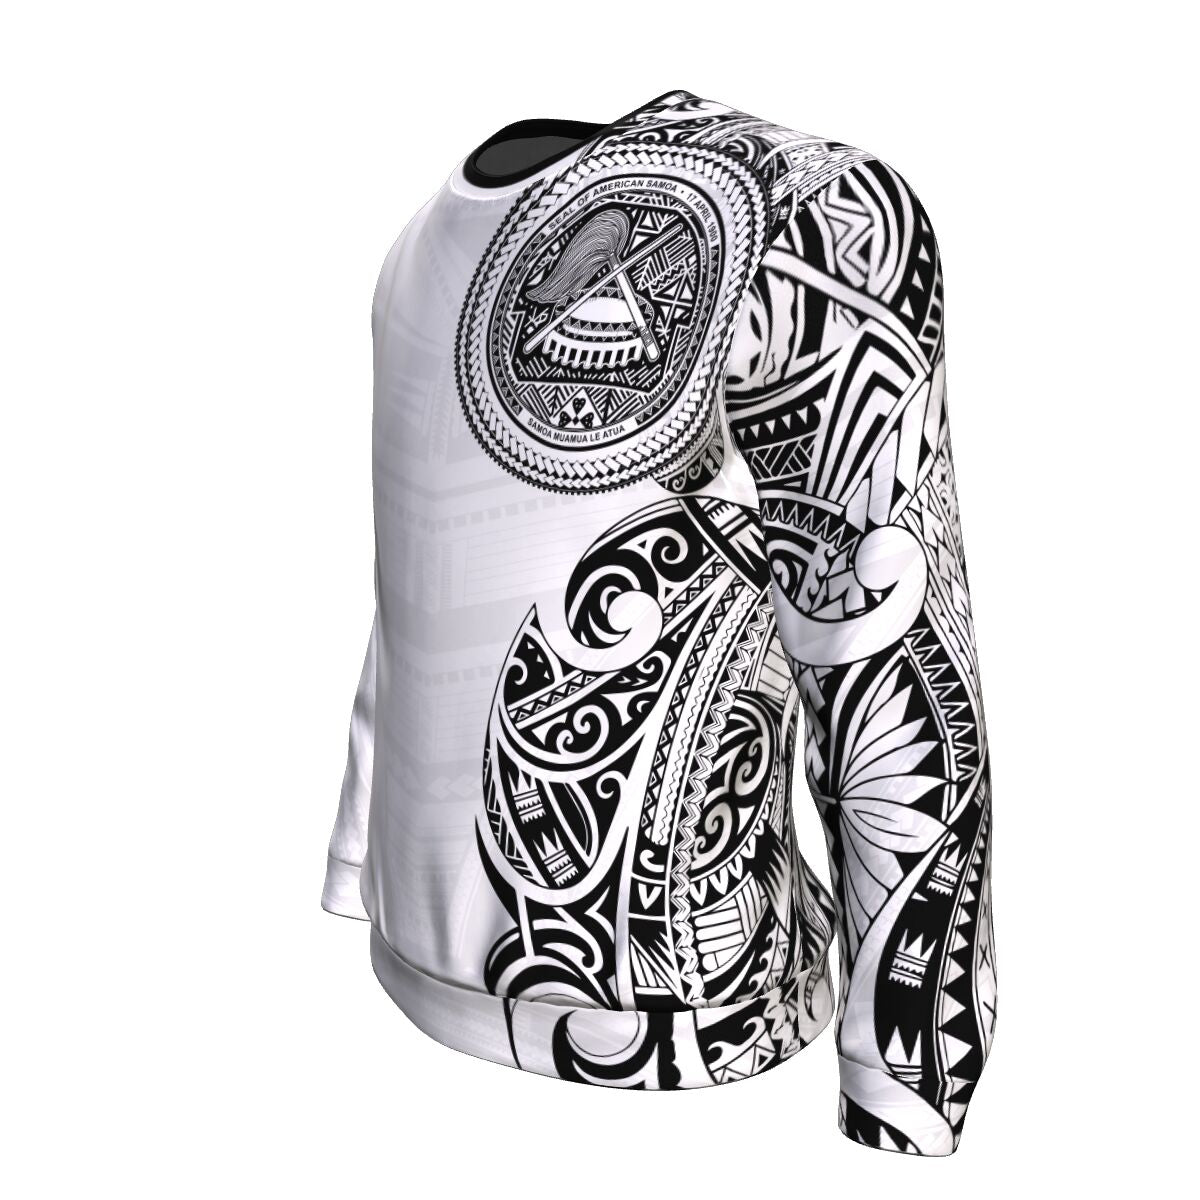 Samoa Black And White Fashion 3D Printed Sublimation Hoodie Hooded  Sweatshirt Comfy Soft And Warm For